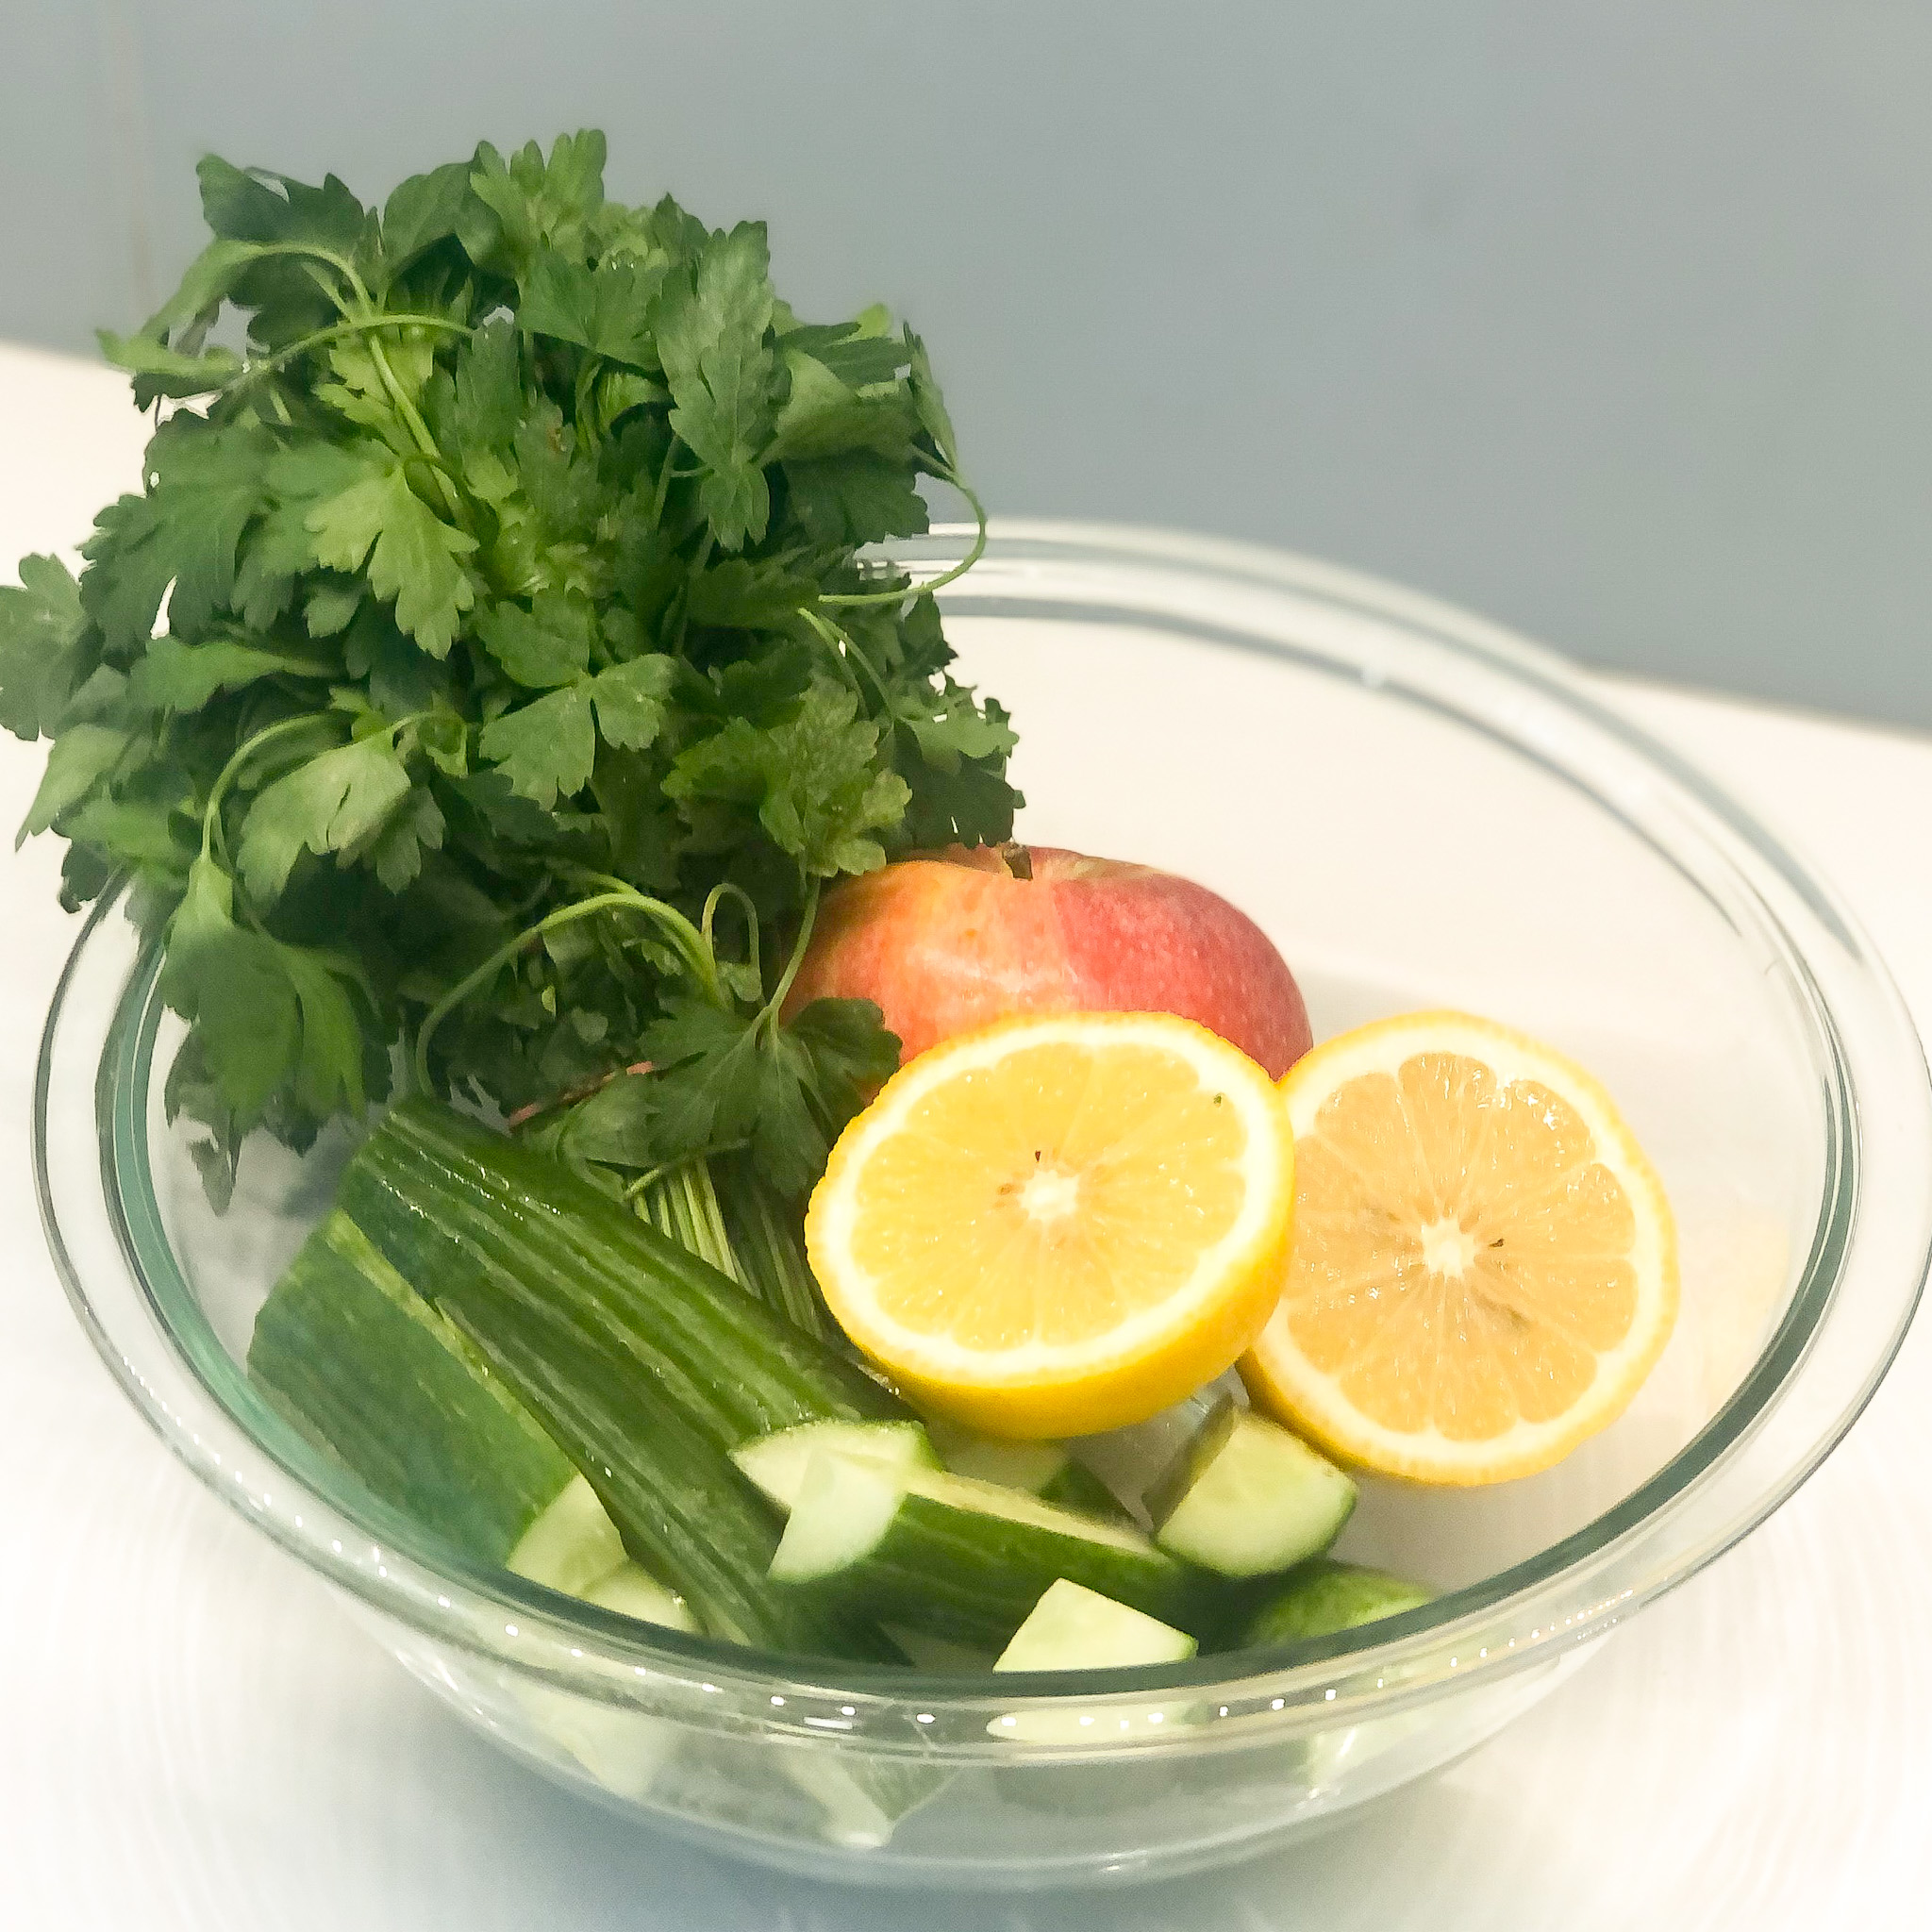 the ingredients to make the green juice: lemon, cucumber, apple, and parsley